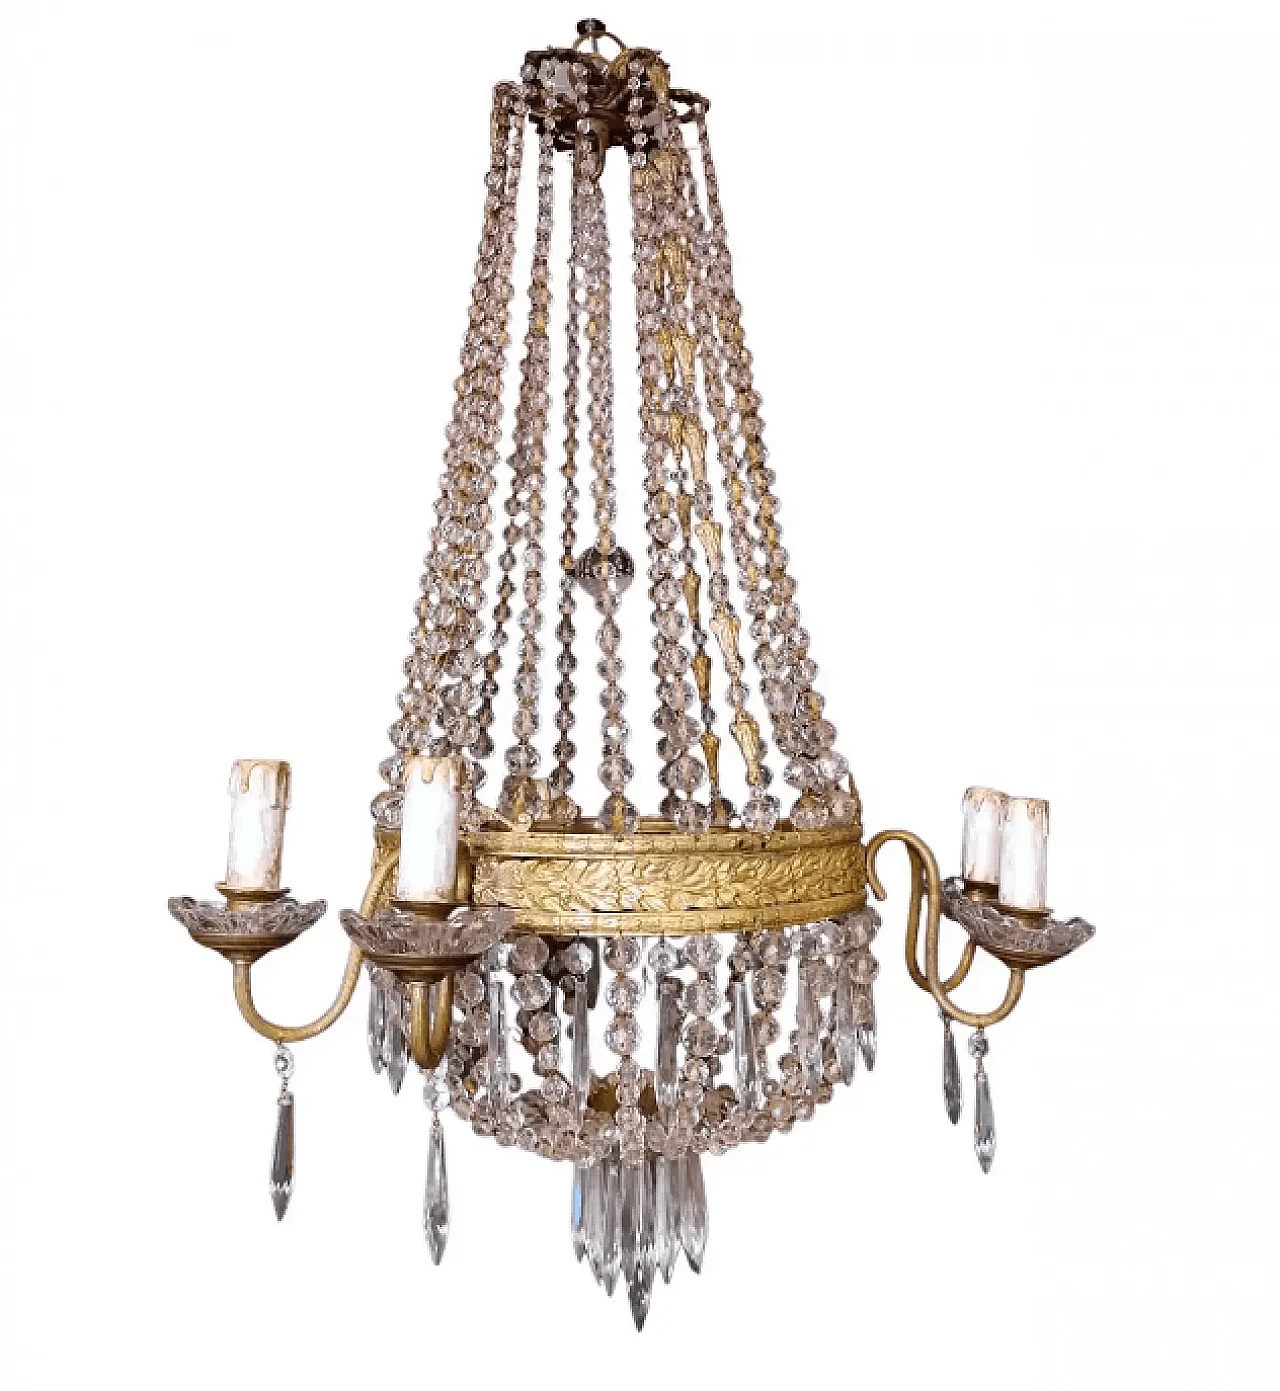 Louis XVI-style hot air balloon chandelier made of lead crystal and gilded brass, 17th century 1